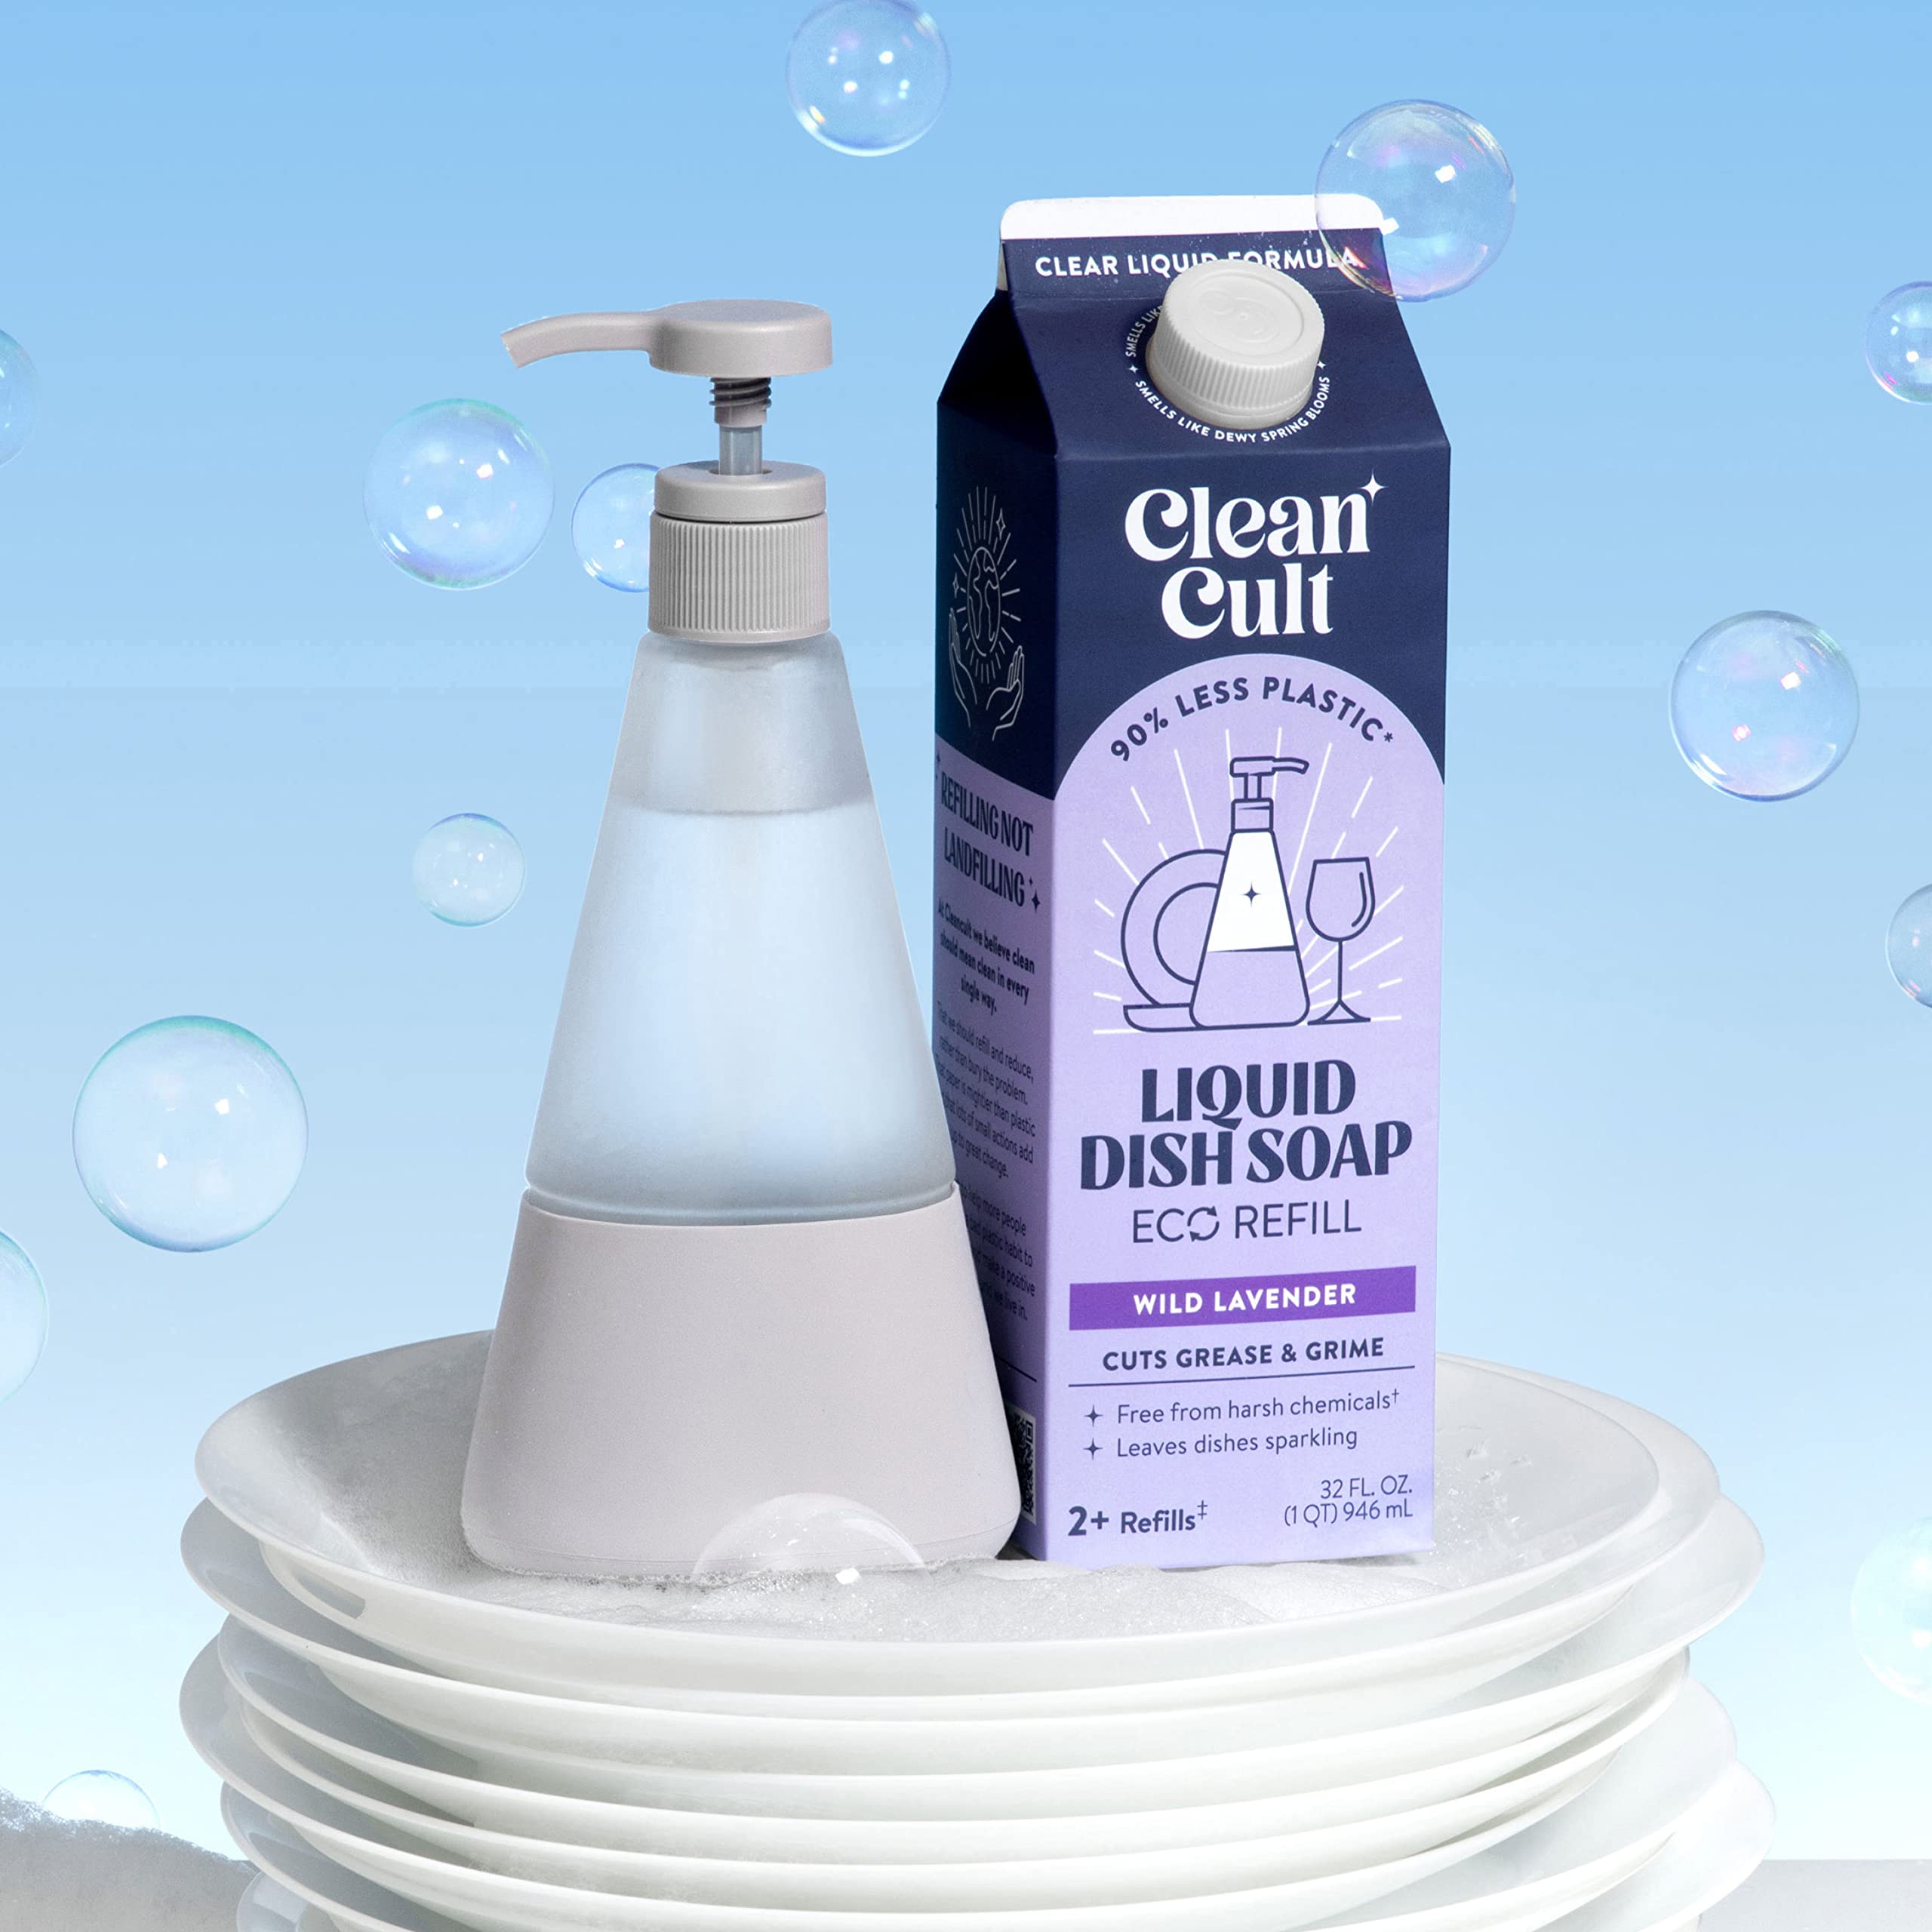 Cleancult Dish Soap Liquid Refills (32oz, 3 Pack) - Dish Soap that Cuts Grease & Grime - Free of Harsh Chemicals - Paper Based Eco Refill, Uses 90% Less Plastic - Wild Lavender